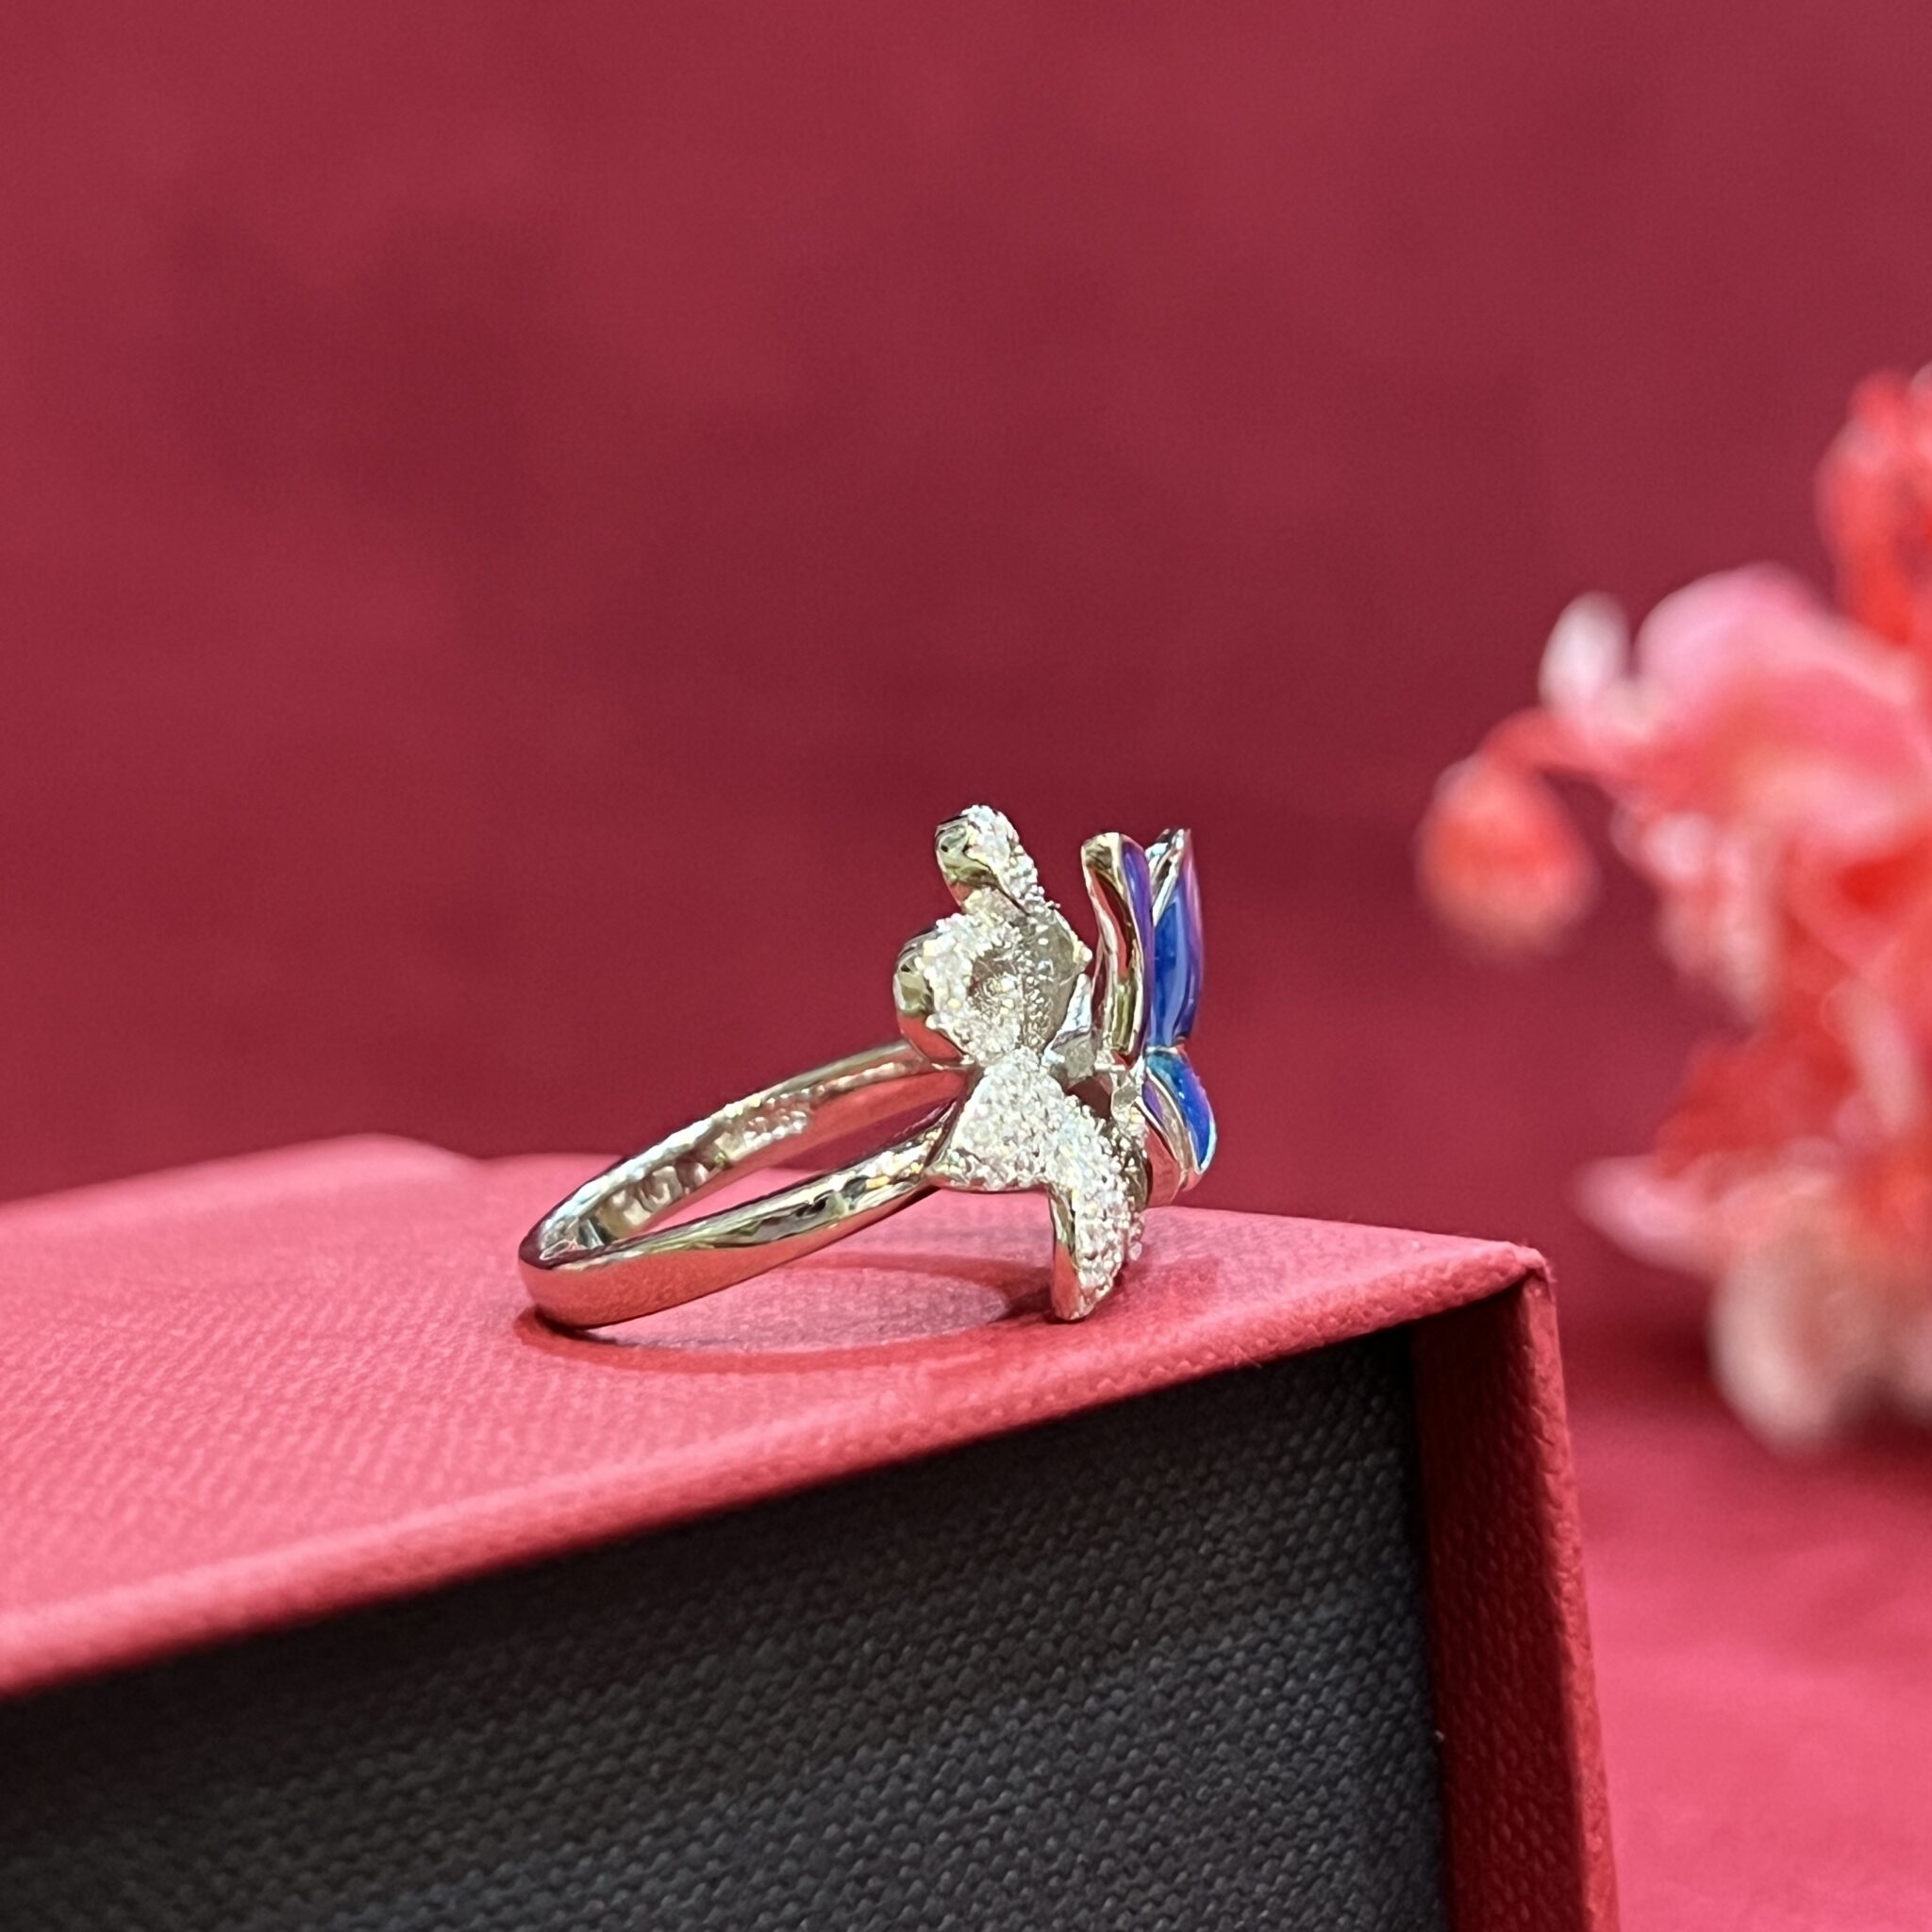 5 Reasons Why Woman’s Need a Silver Ring in Her Jewelry Collection